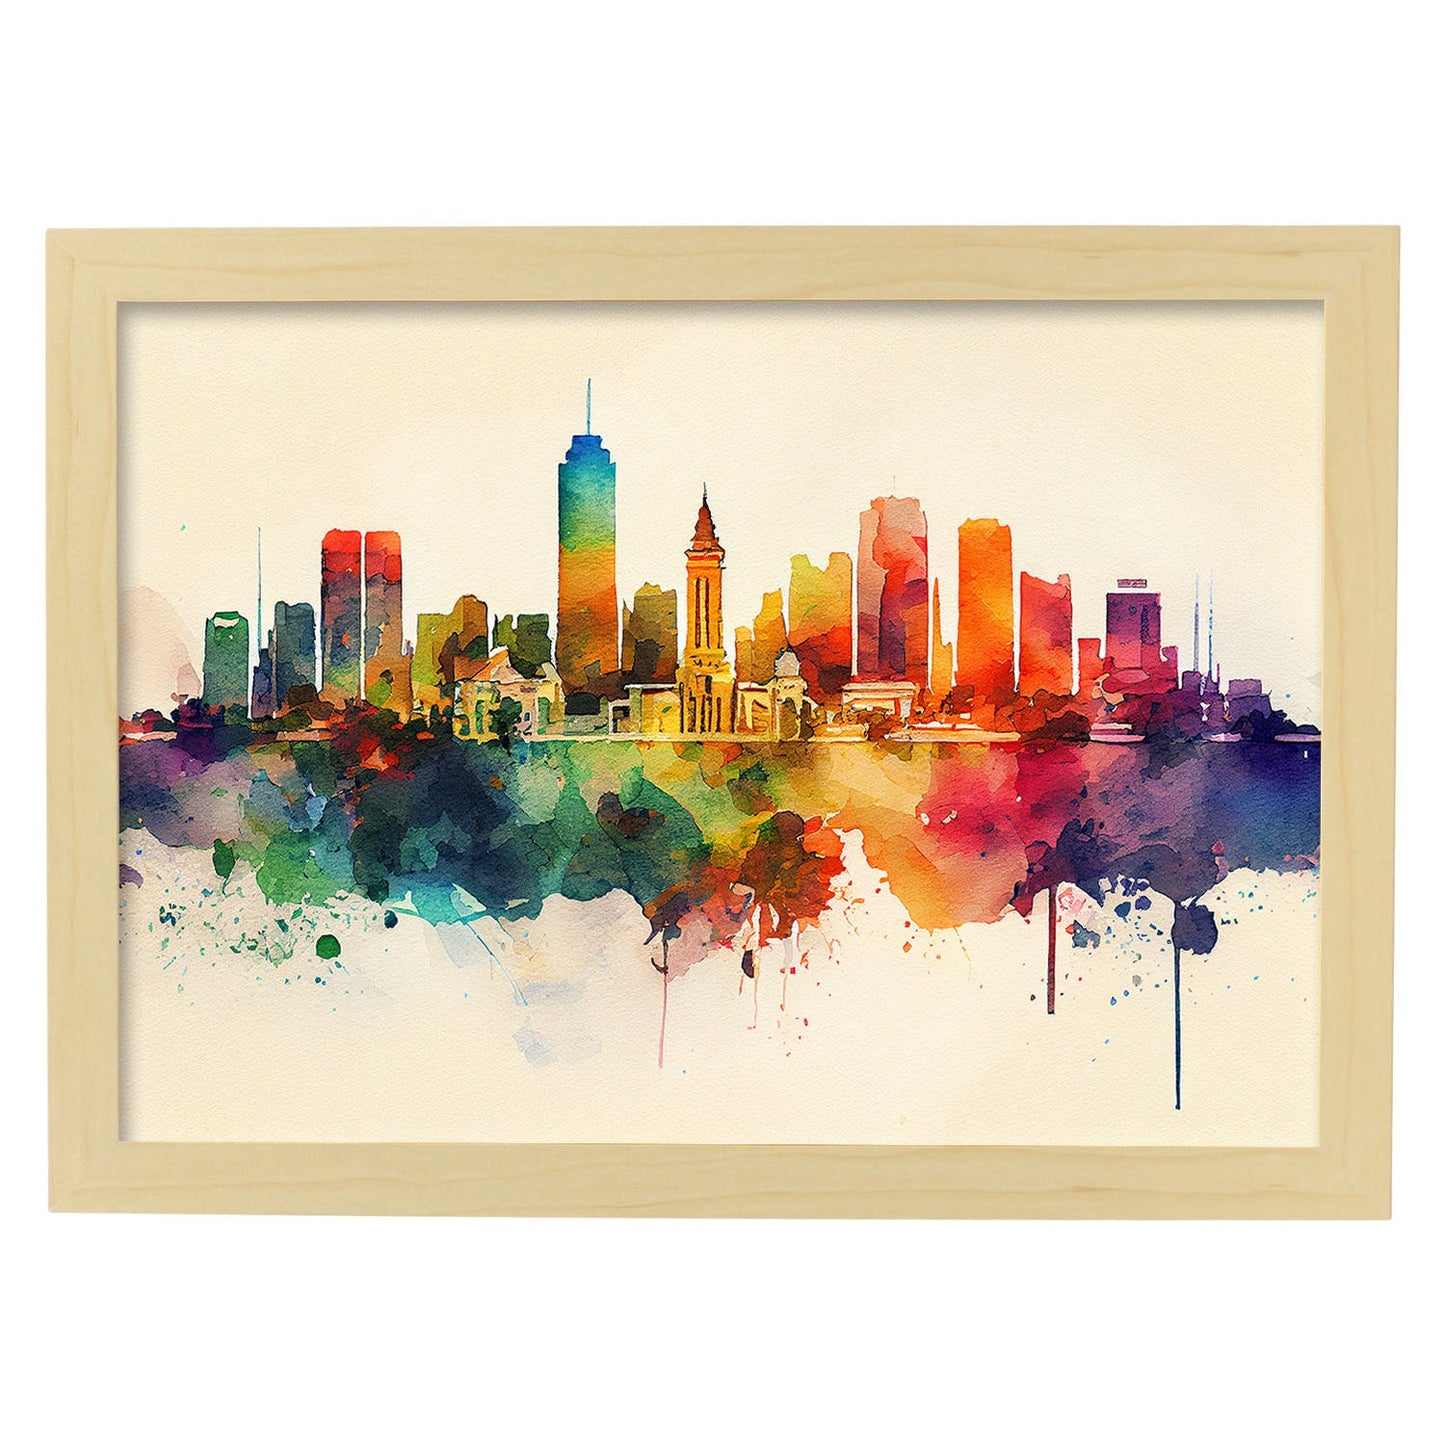 Nacnic watercolor of a skyline of the city of Manila_2. Aesthetic Wall Art Prints for Bedroom or Living Room Design.-Artwork-Nacnic-A4-Marco Madera Clara-Nacnic Estudio SL